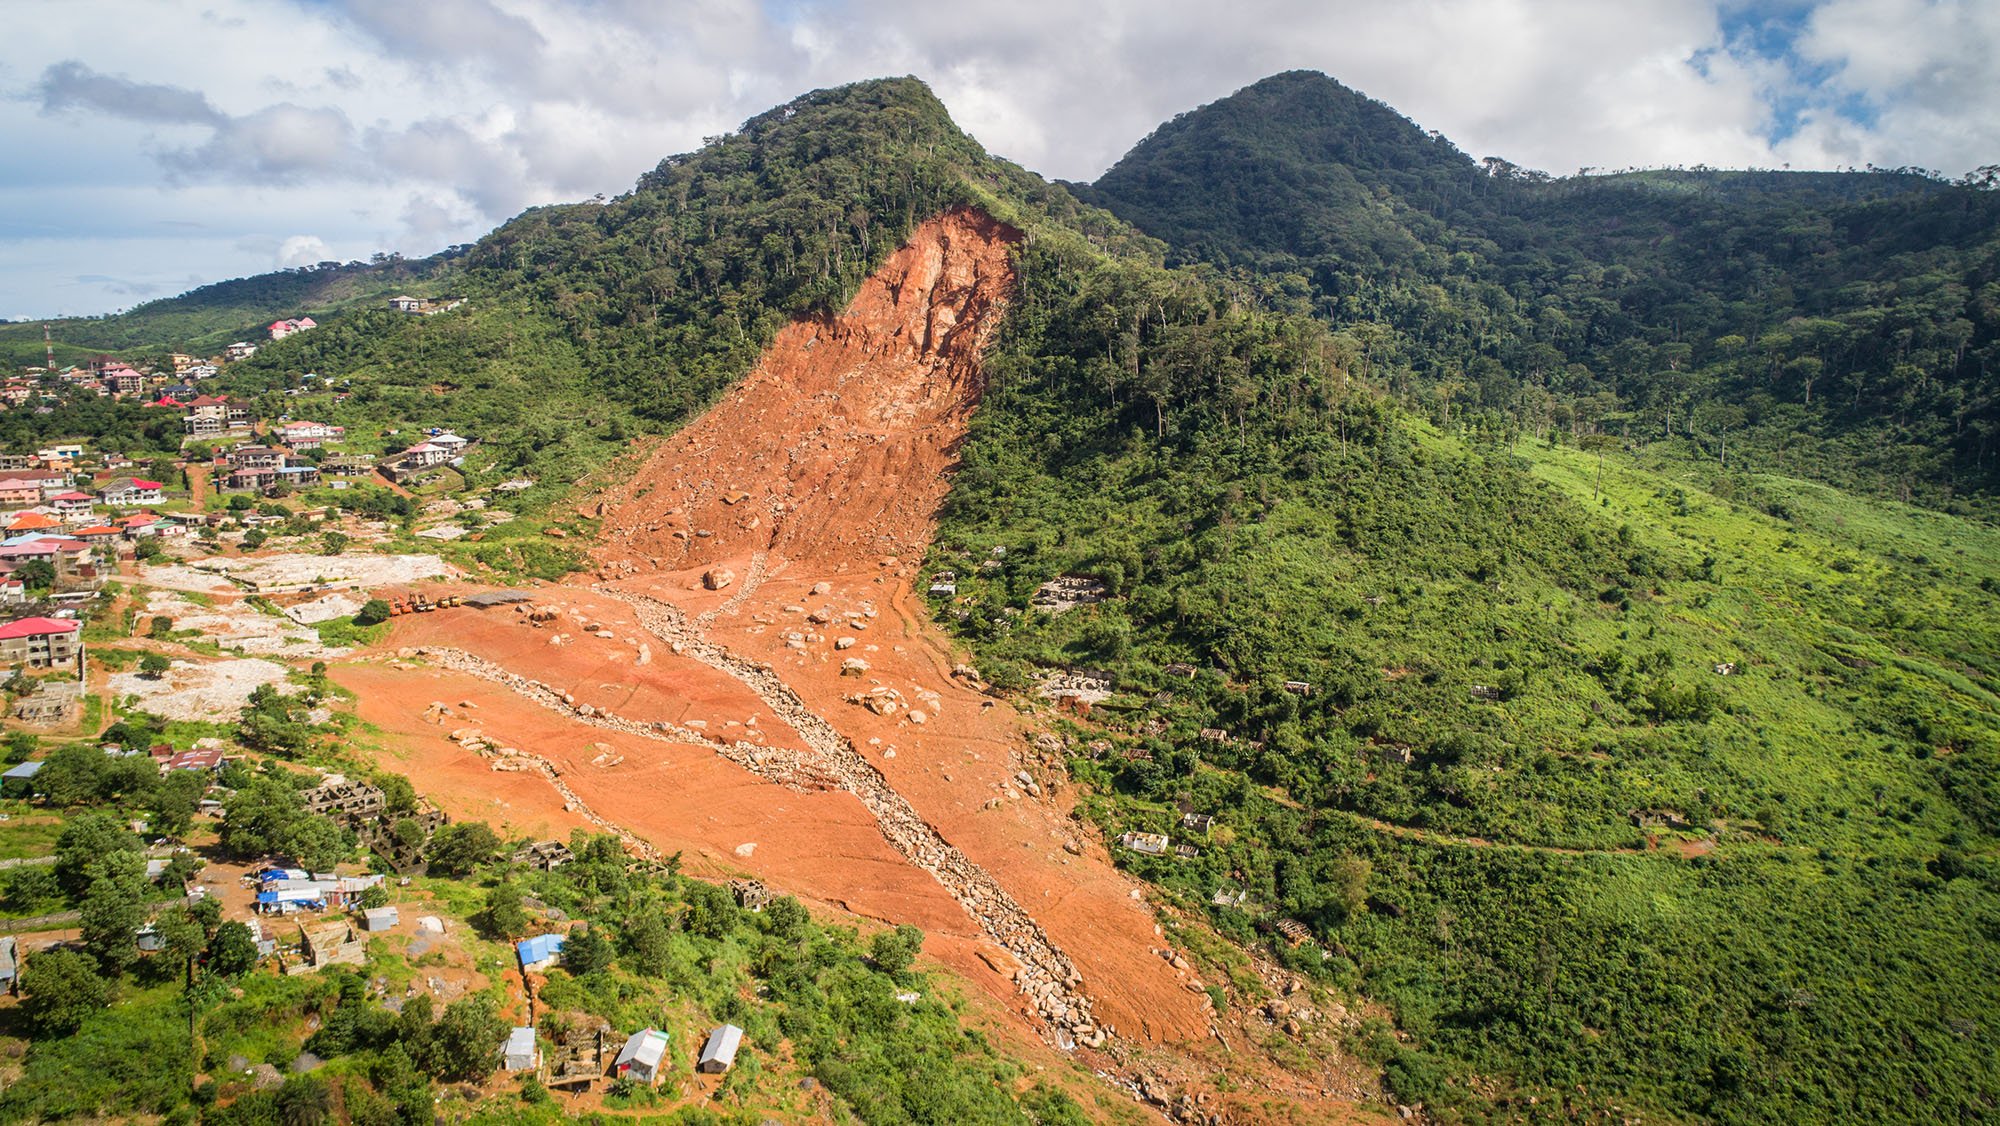 Photo showing the aftermath of a landslide in Freetown, Sierra Leone